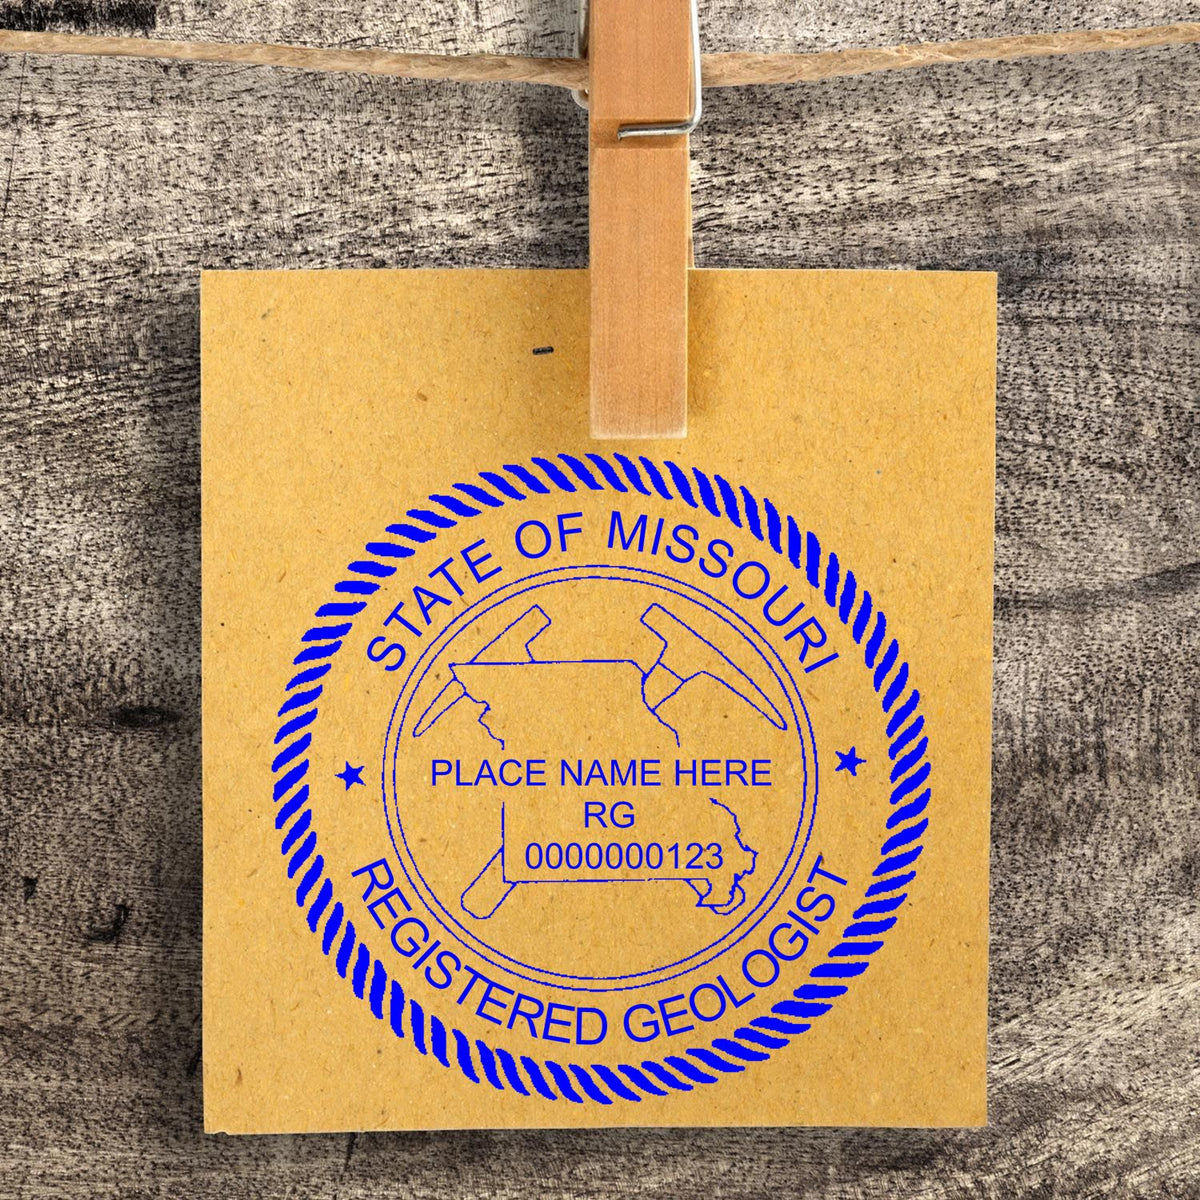 A lifestyle photo showing a stamped image of the Digital Missouri Geologist Stamp, Electronic Seal for Missouri Geologist on a piece of paper